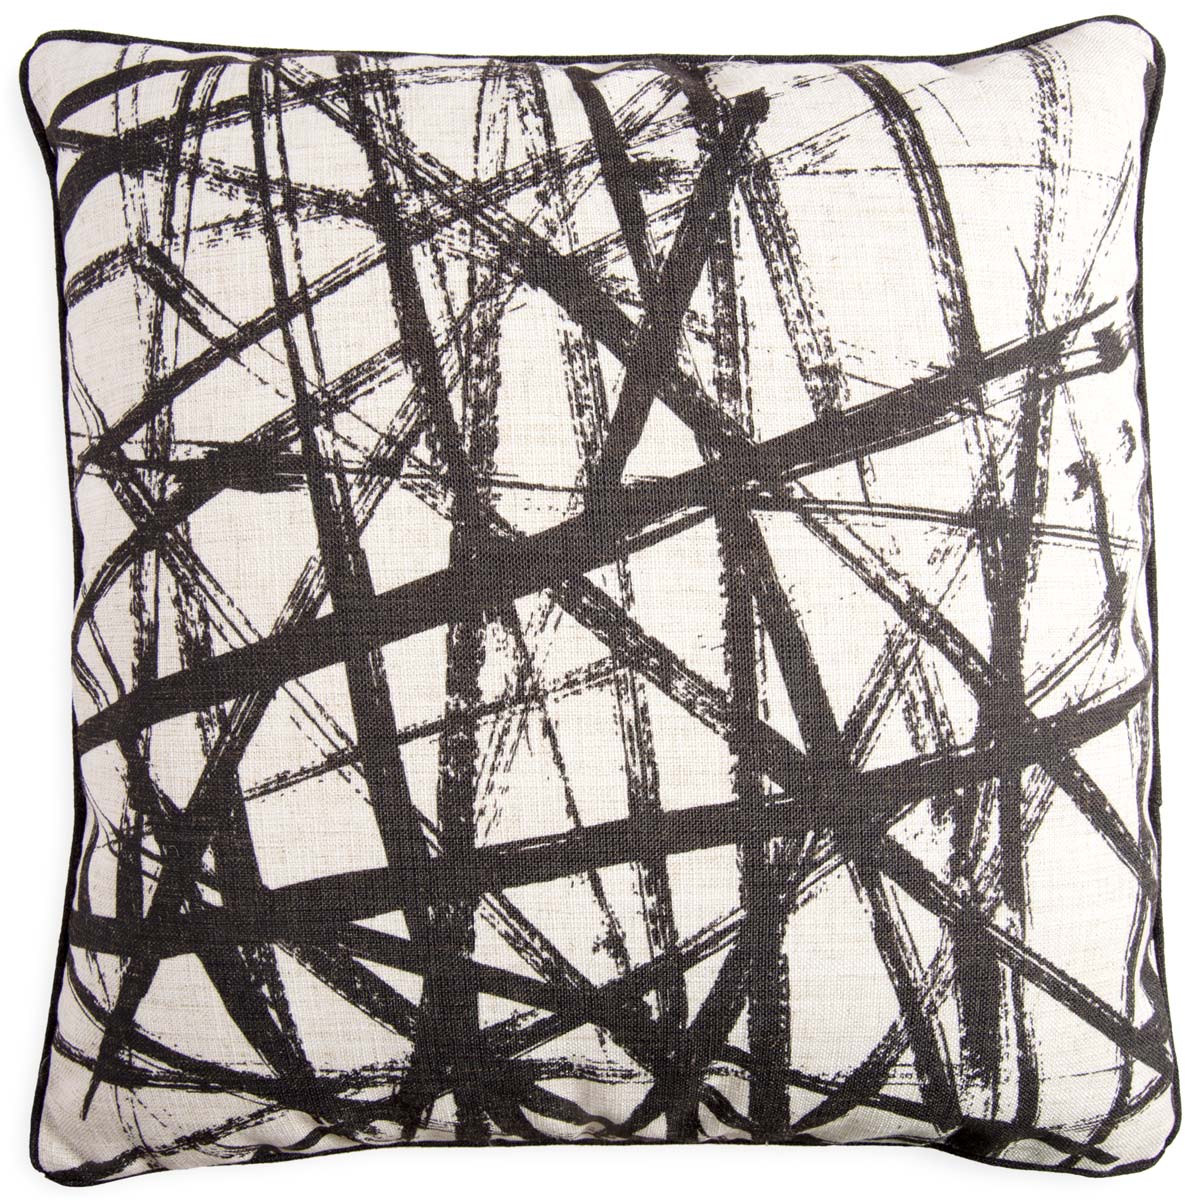 Throw pillow with a white background and black brush strokes design.